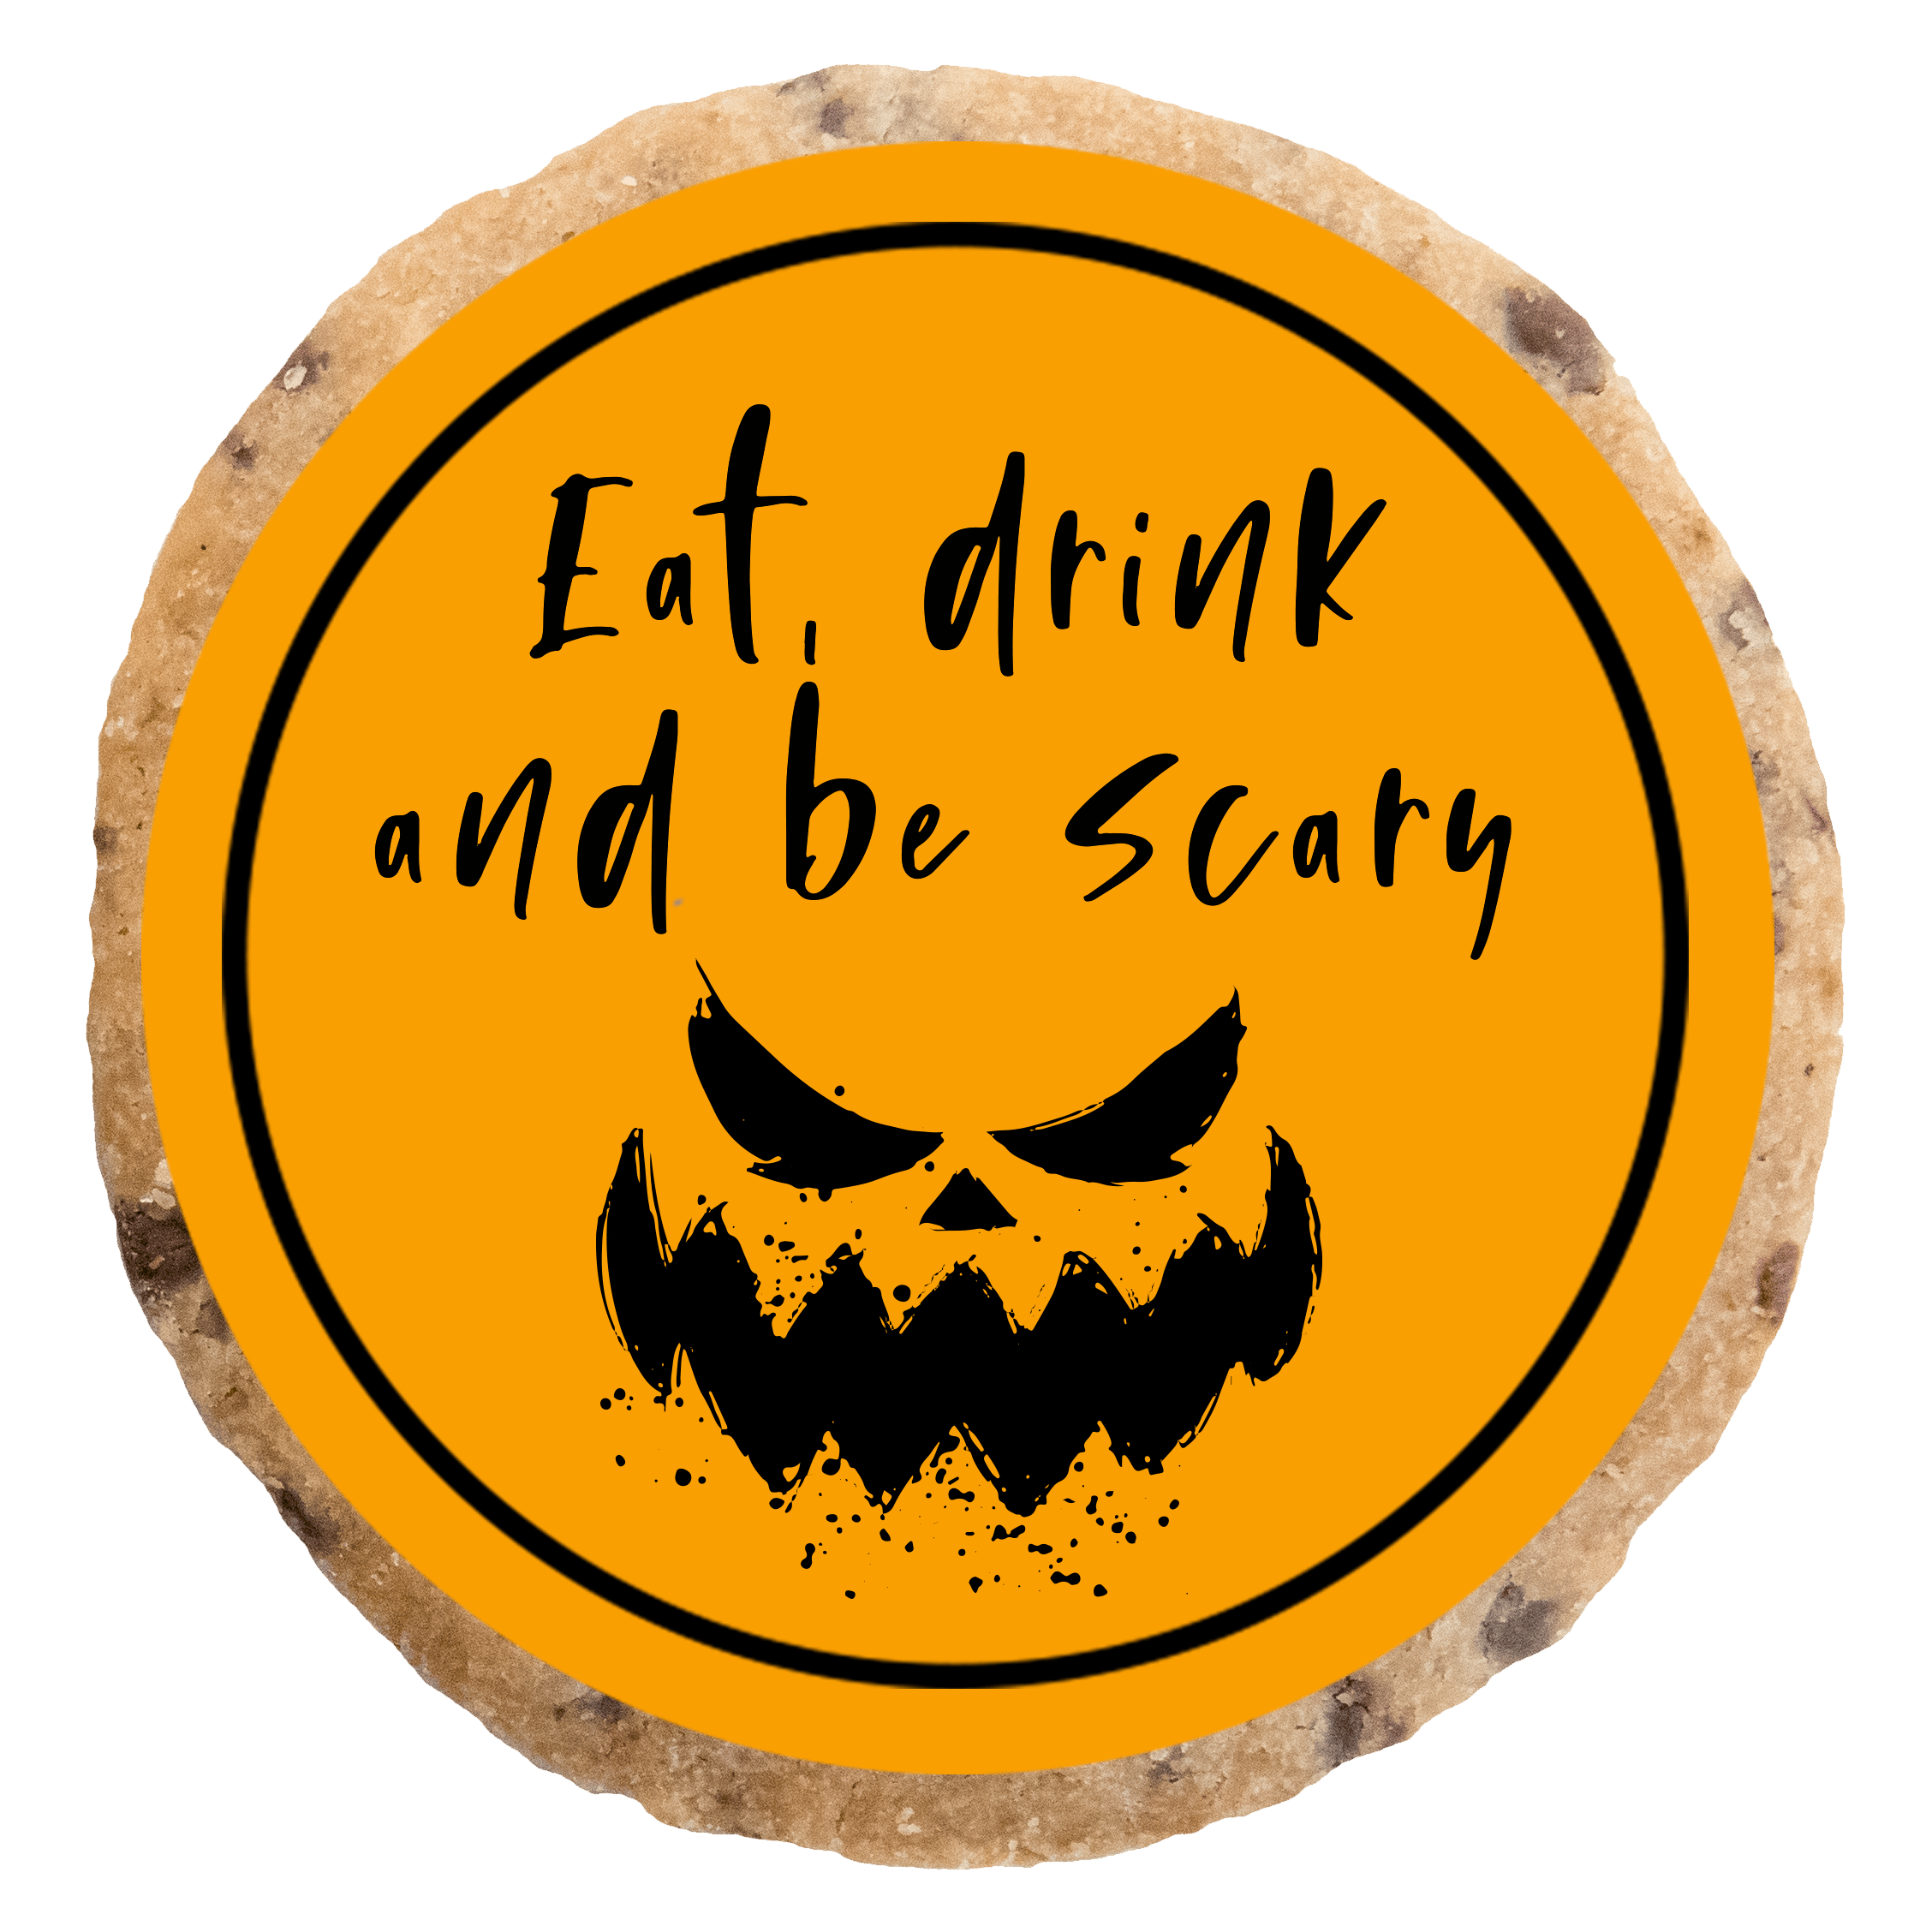 "Eat, drink and be scary" MotivKEKS